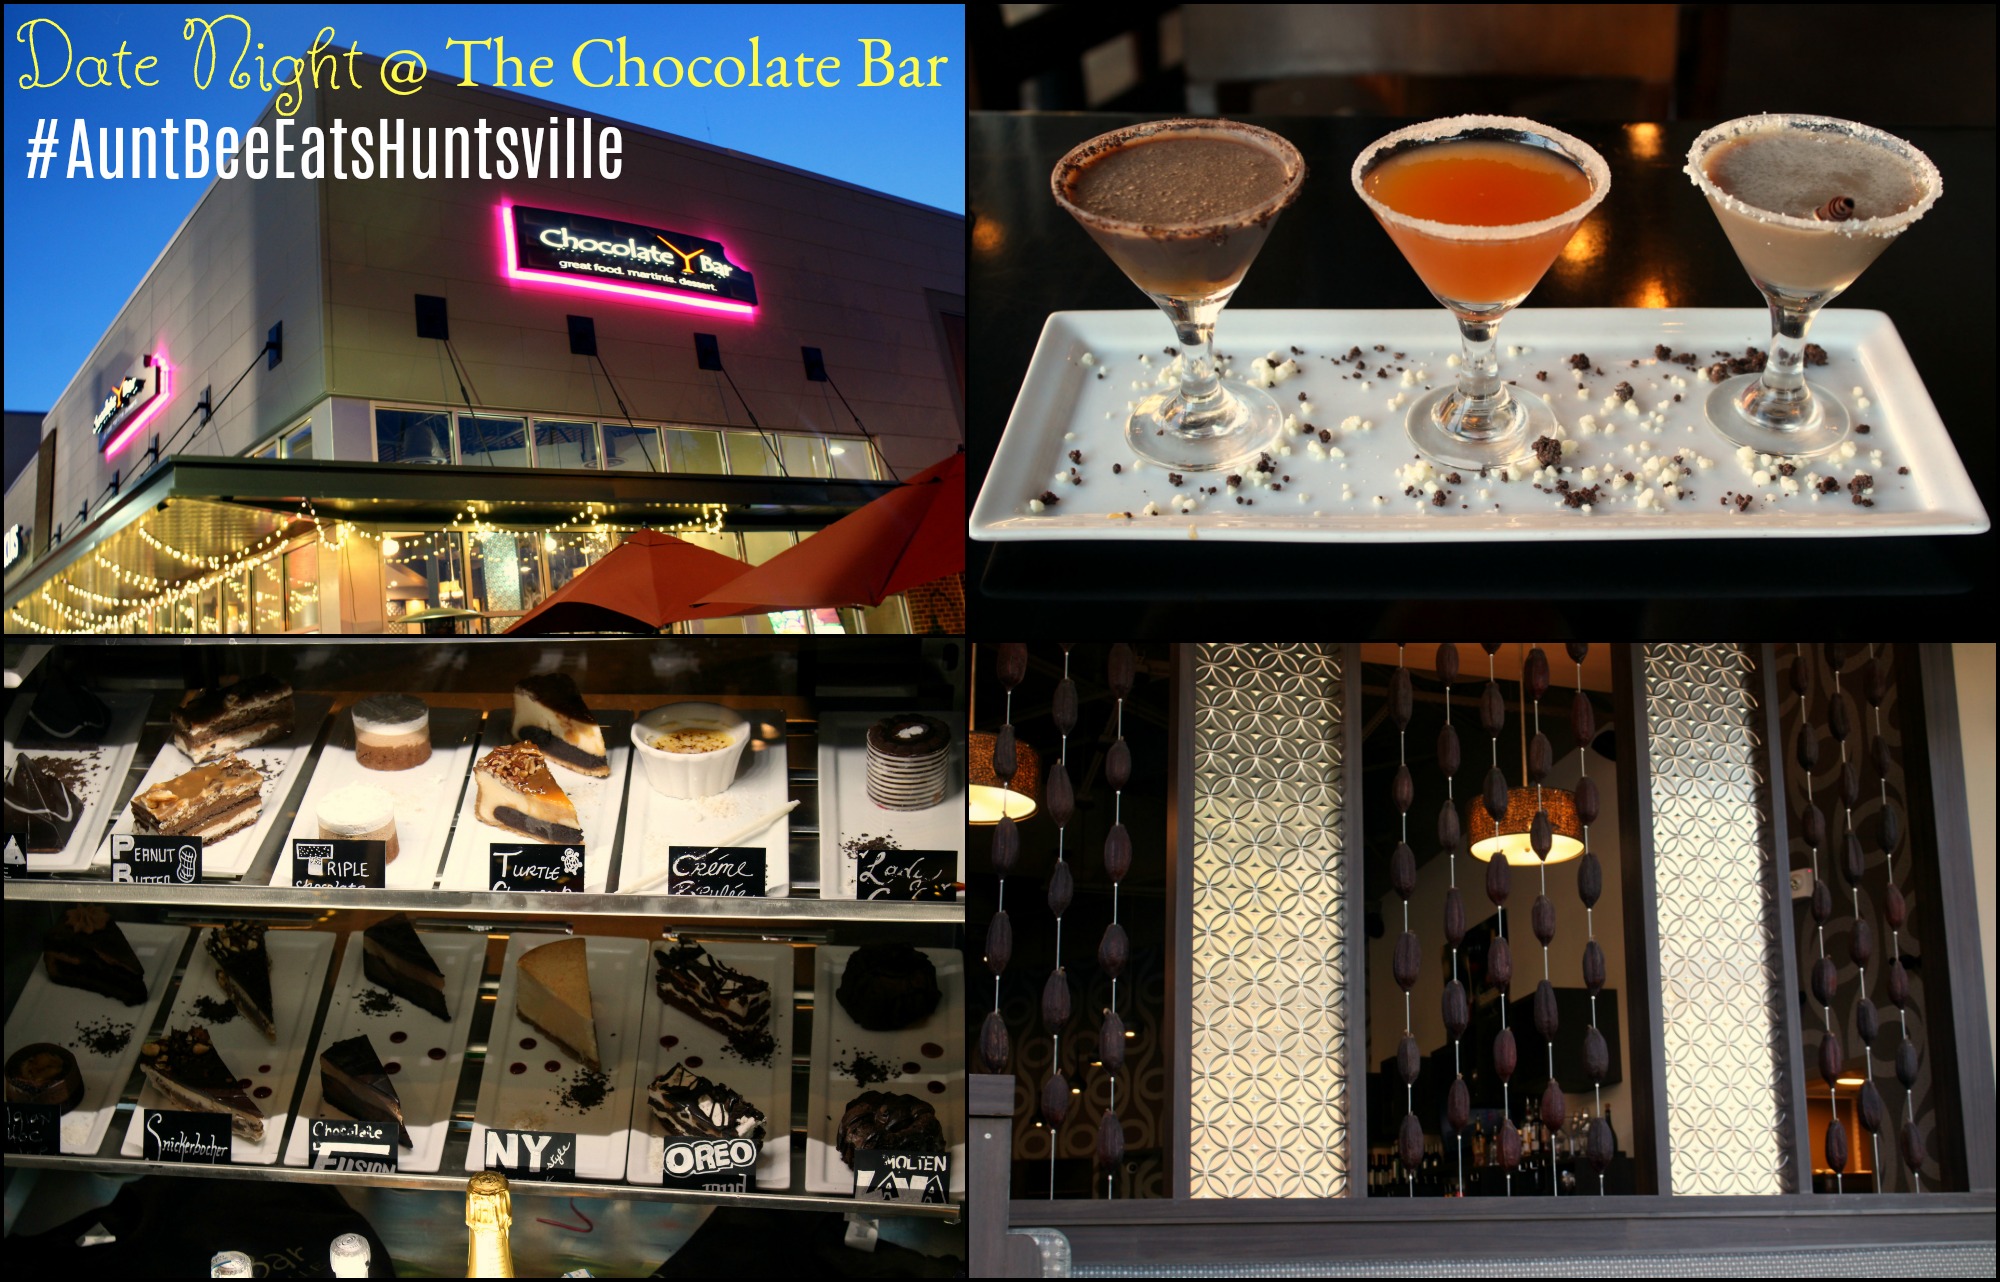 Date Night at The Chocolate Bar